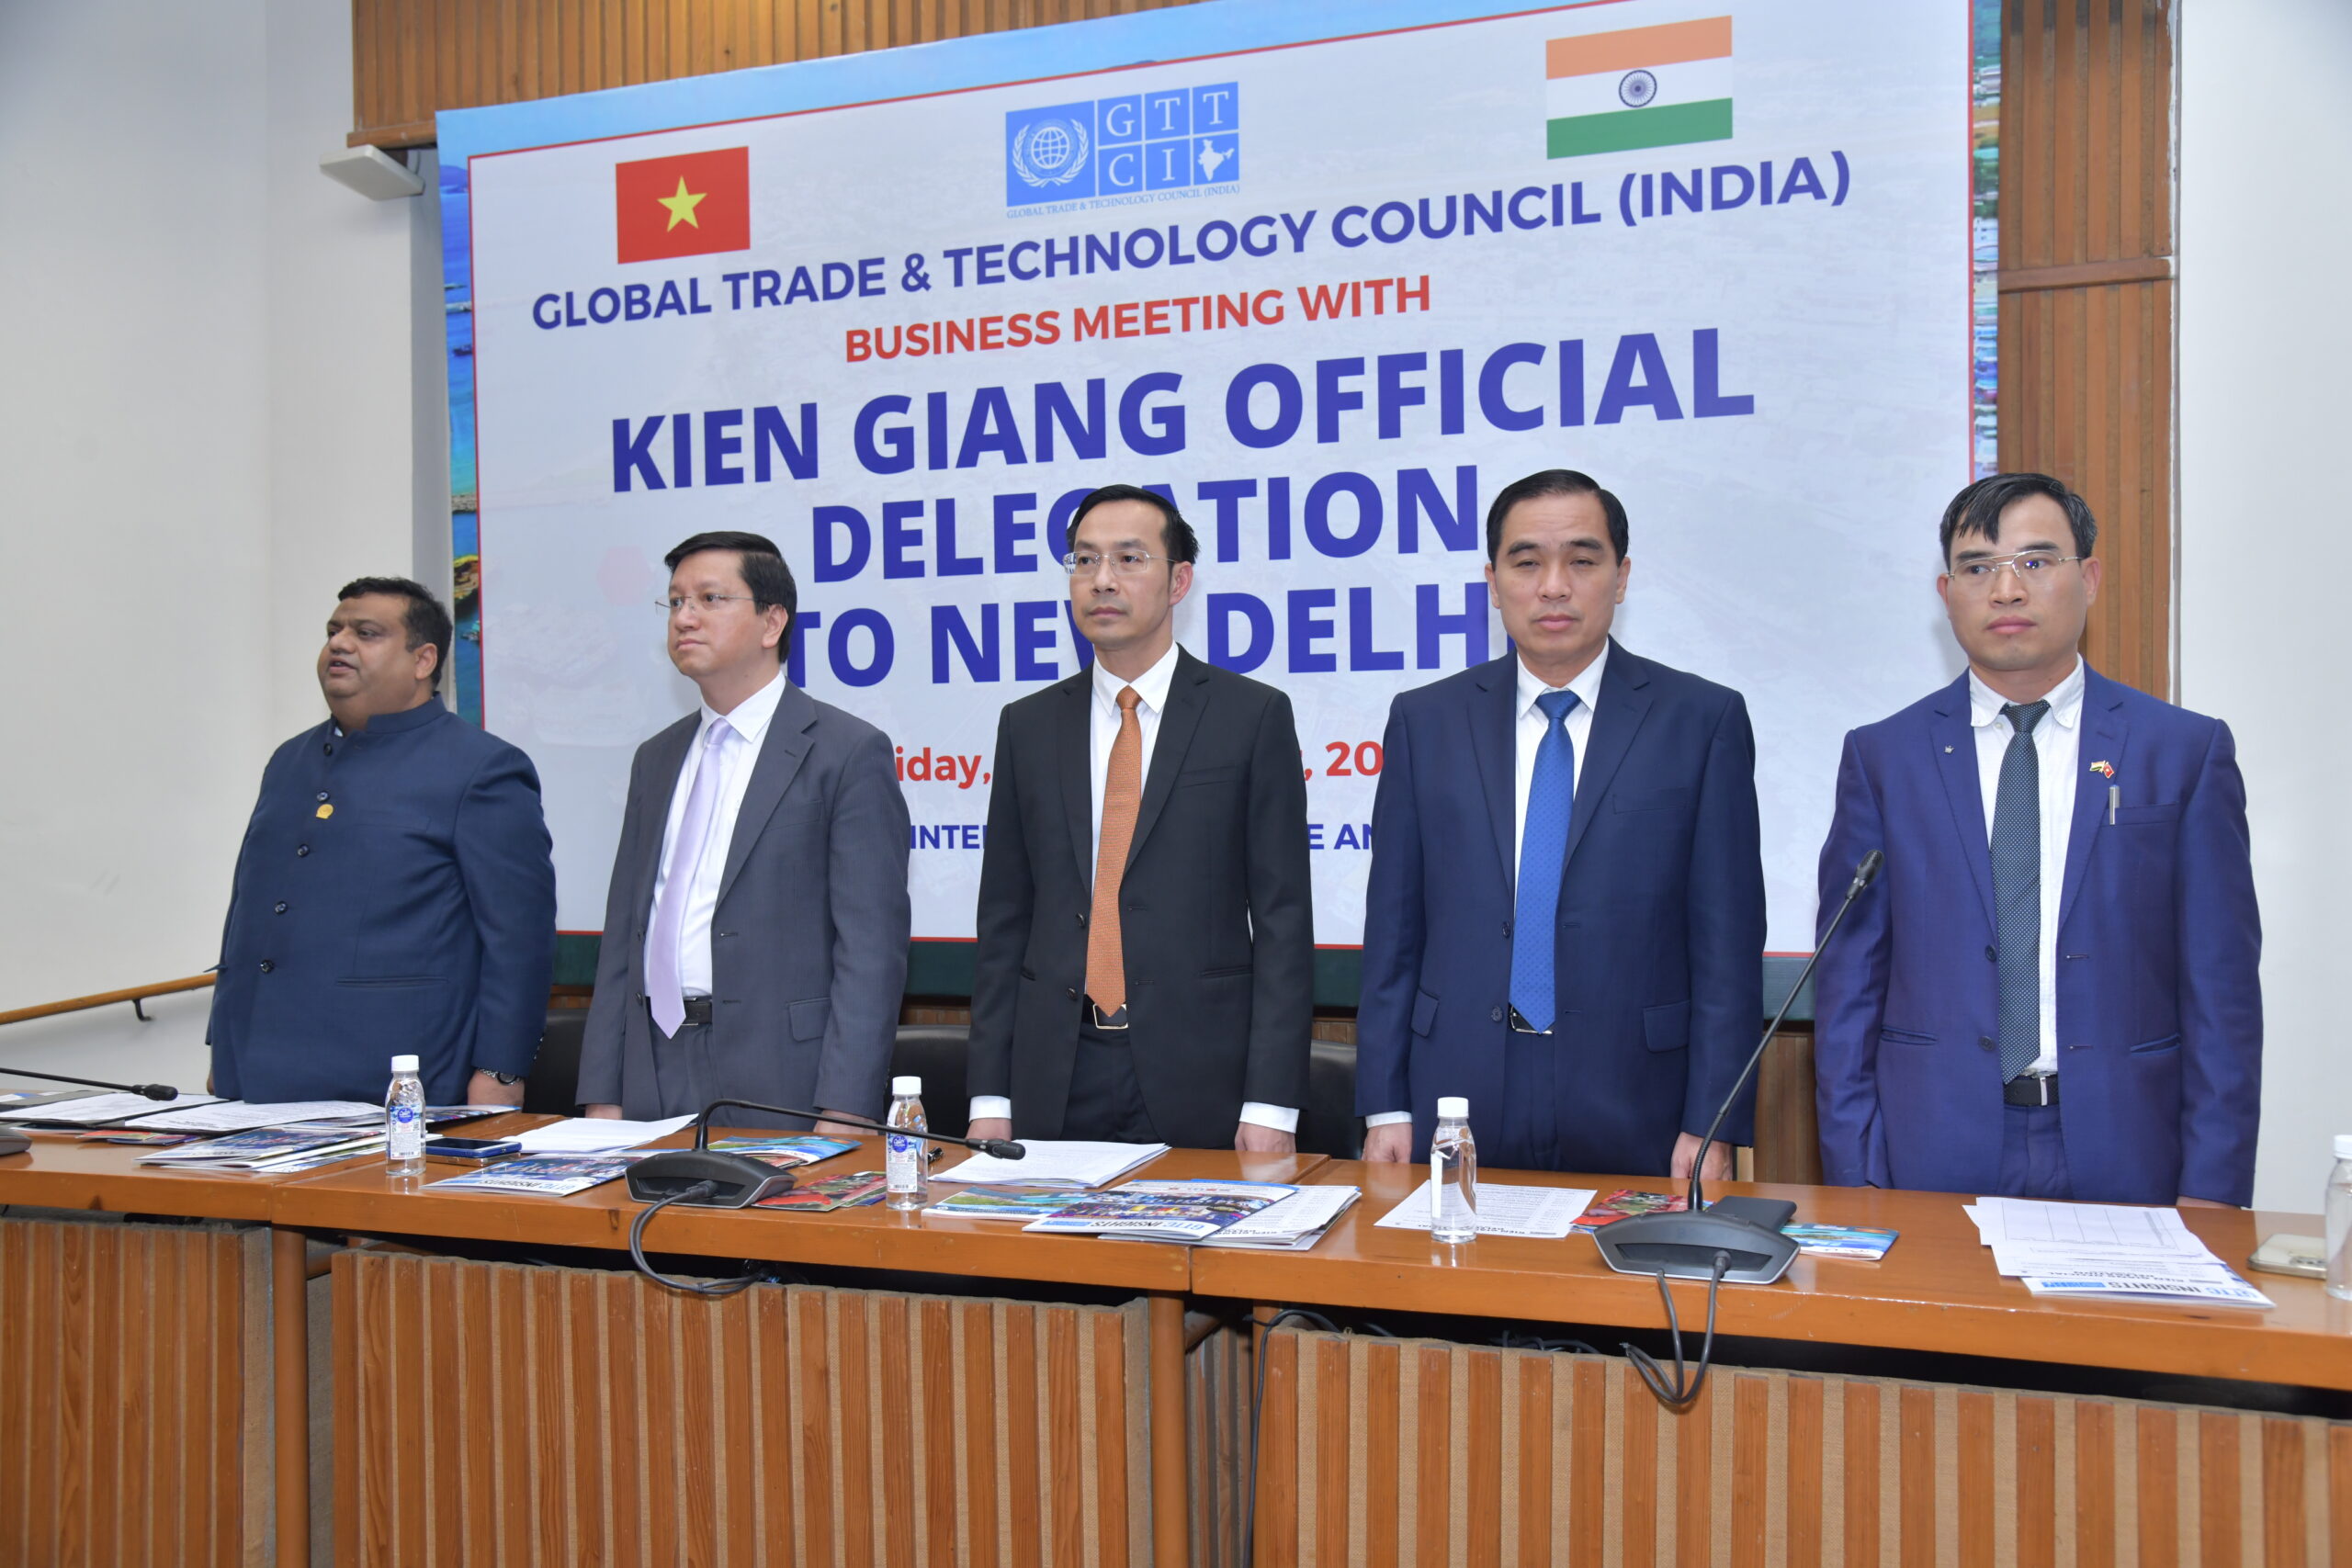 Business Meeting with Official Delegation from Kien Giang, Vietnam to New Delhi